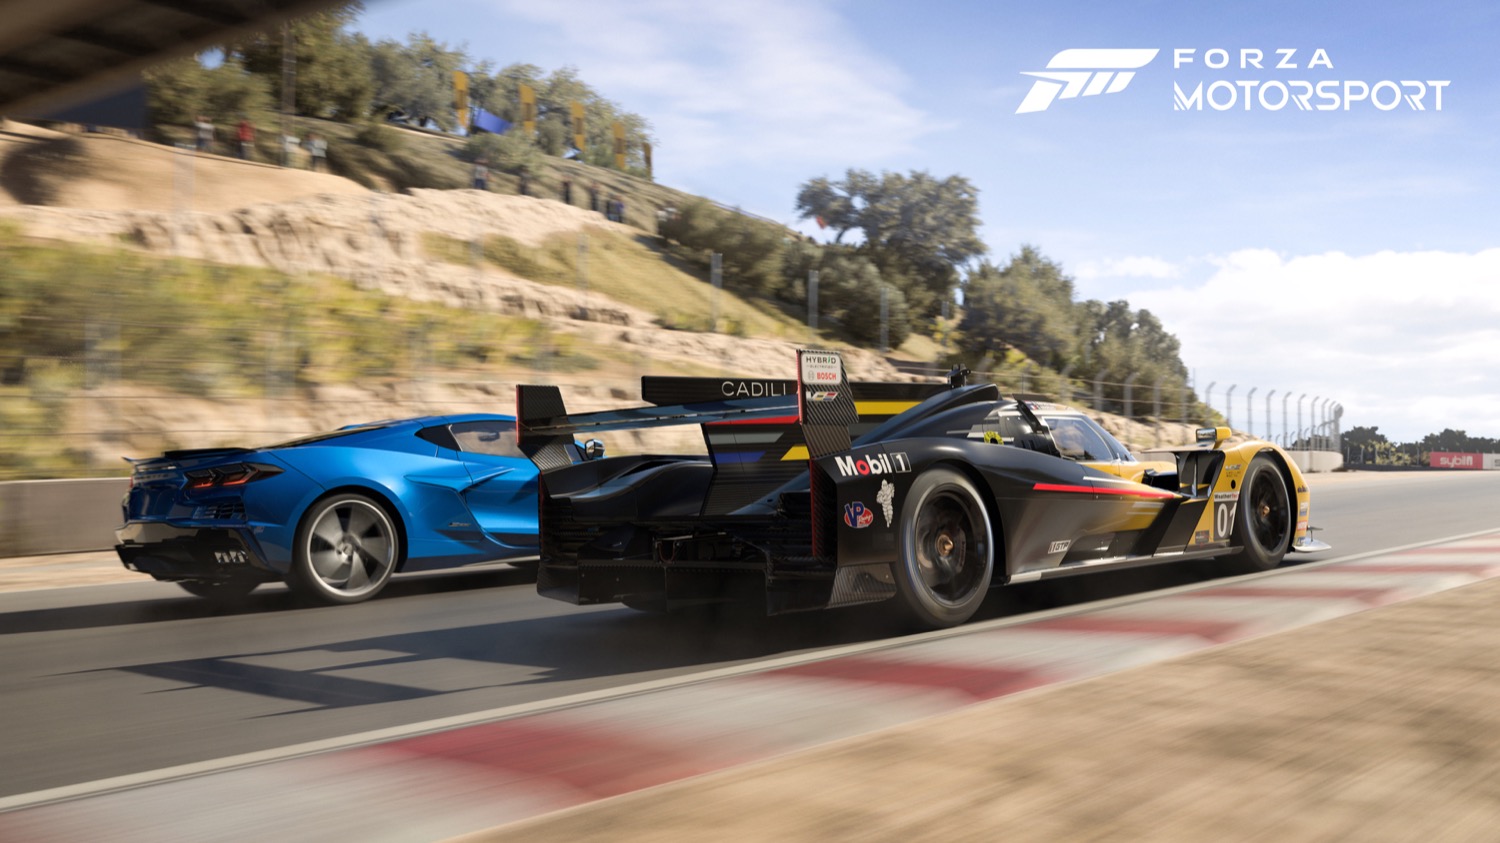 Latest 'Forza Motorsport' racing game due in 2023 - Drive